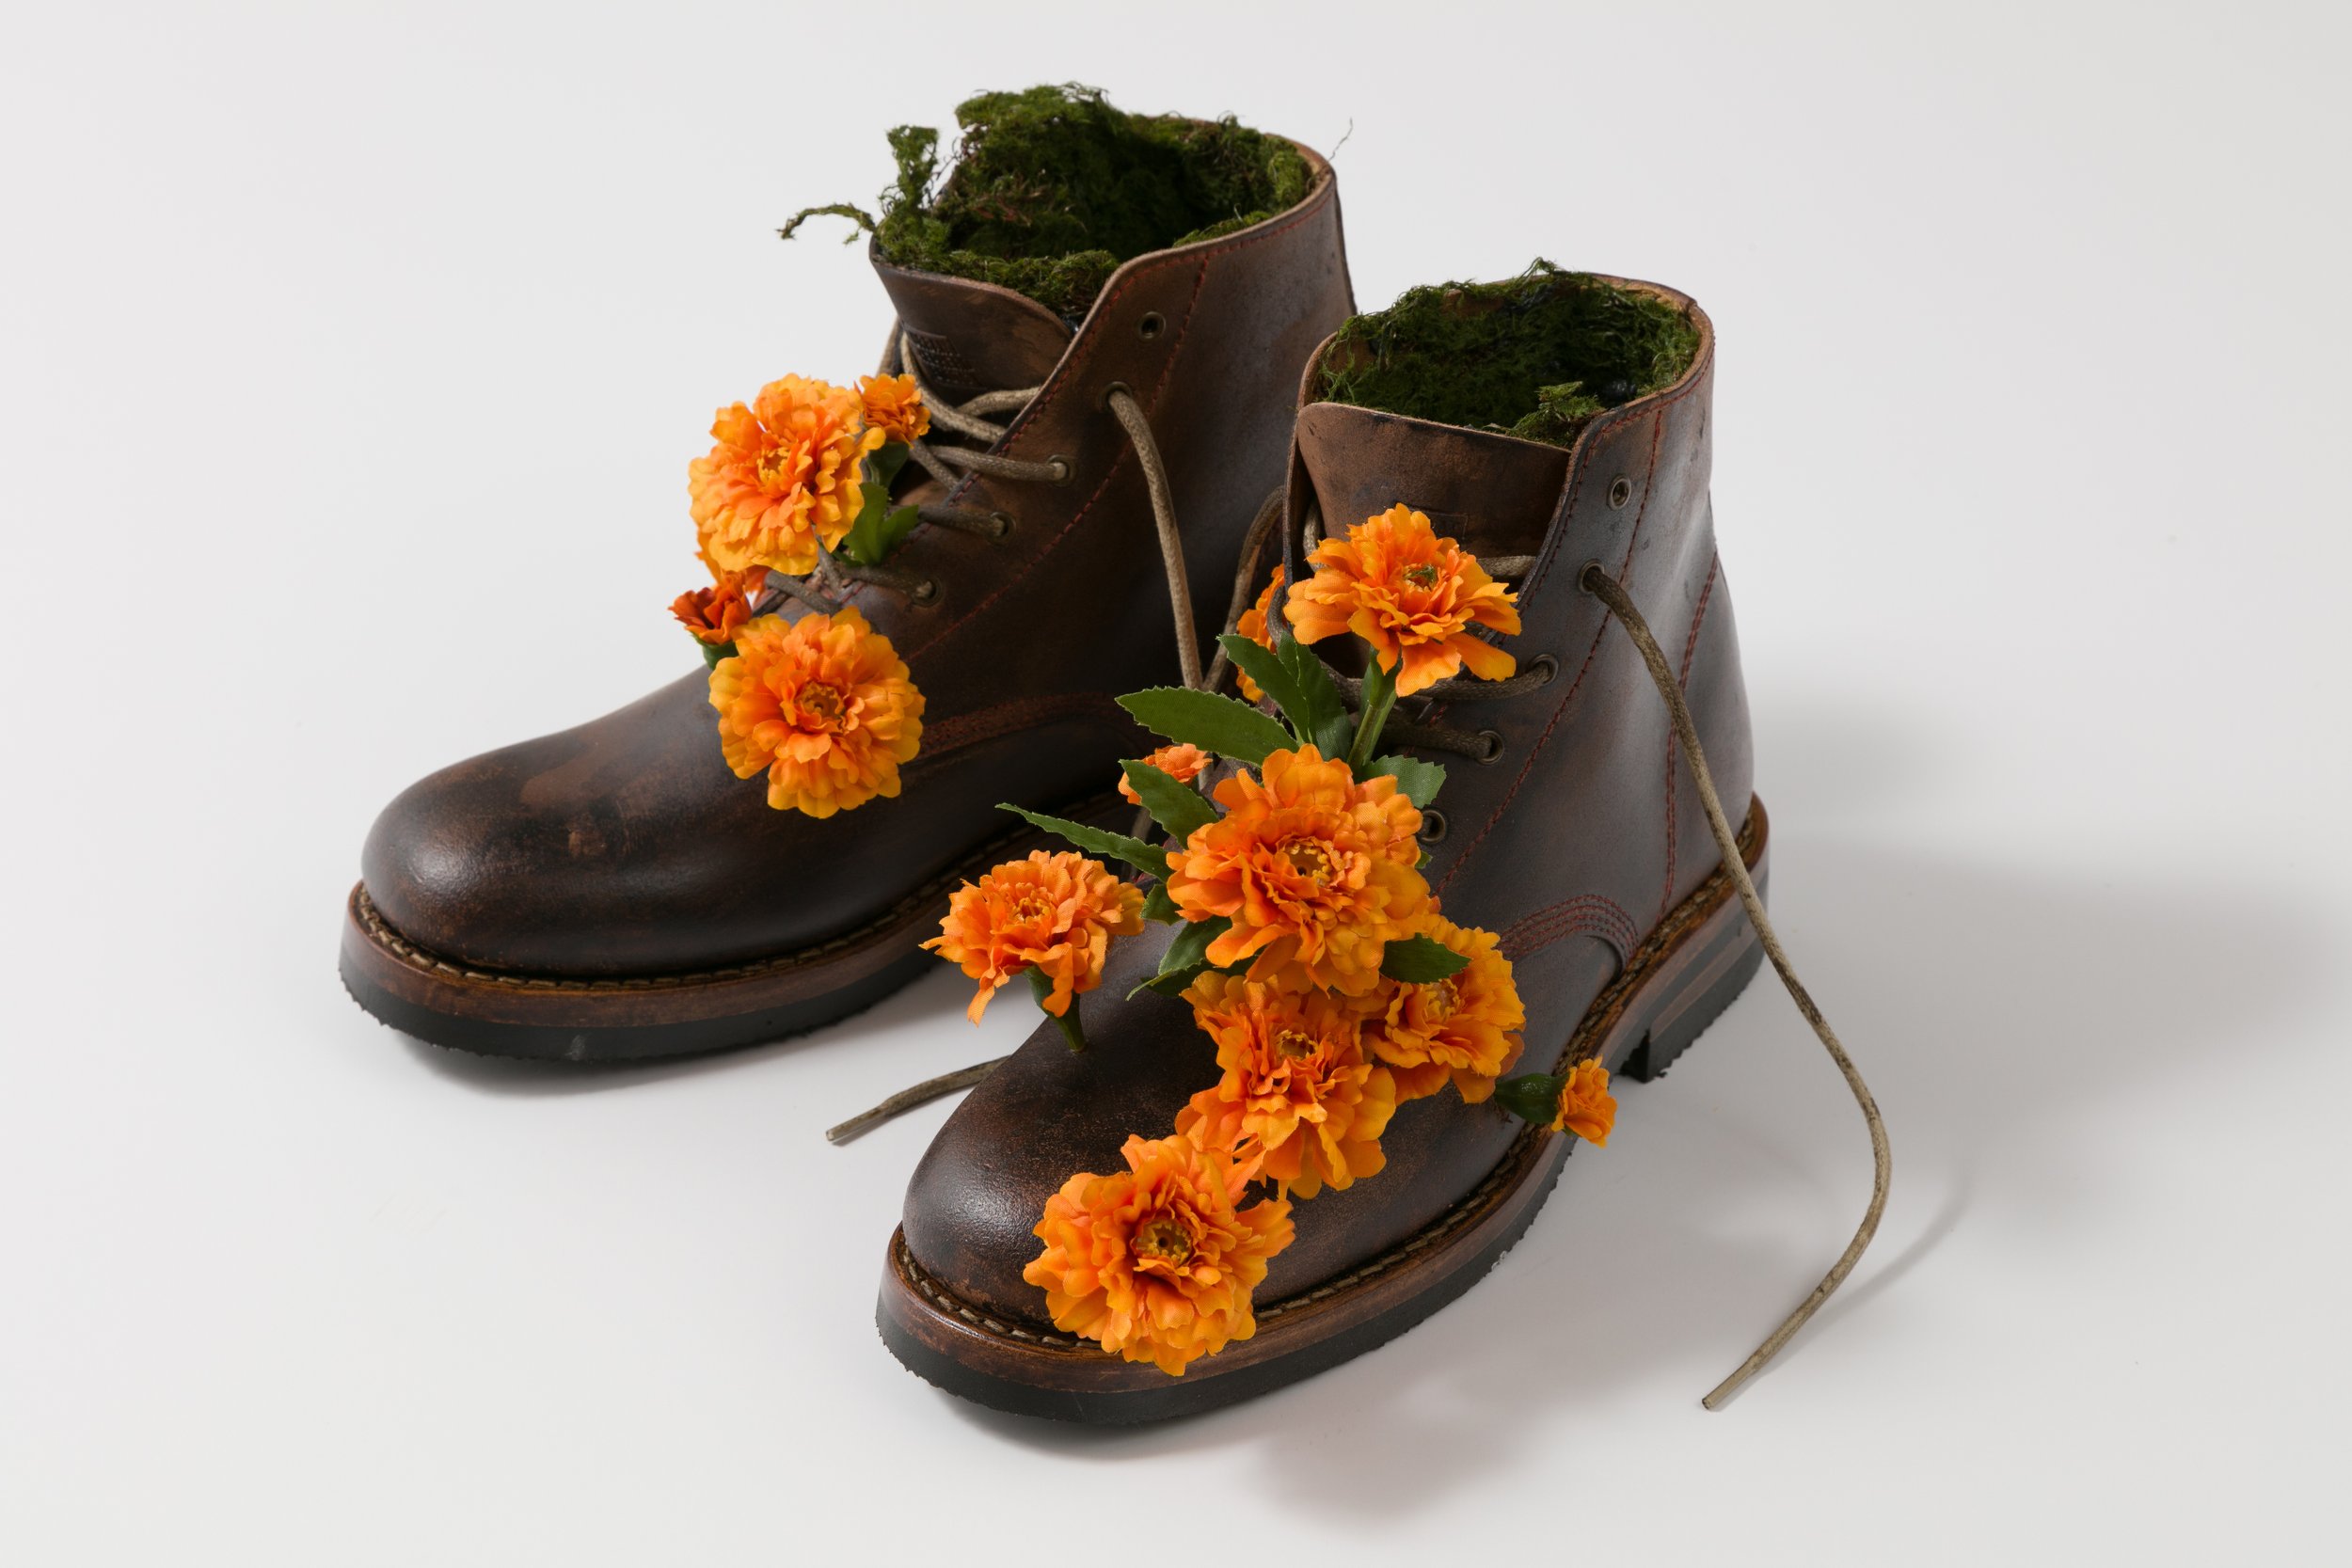 "The Sower", 7"x11"x9", leather boots, artificial flowers, moss, paint